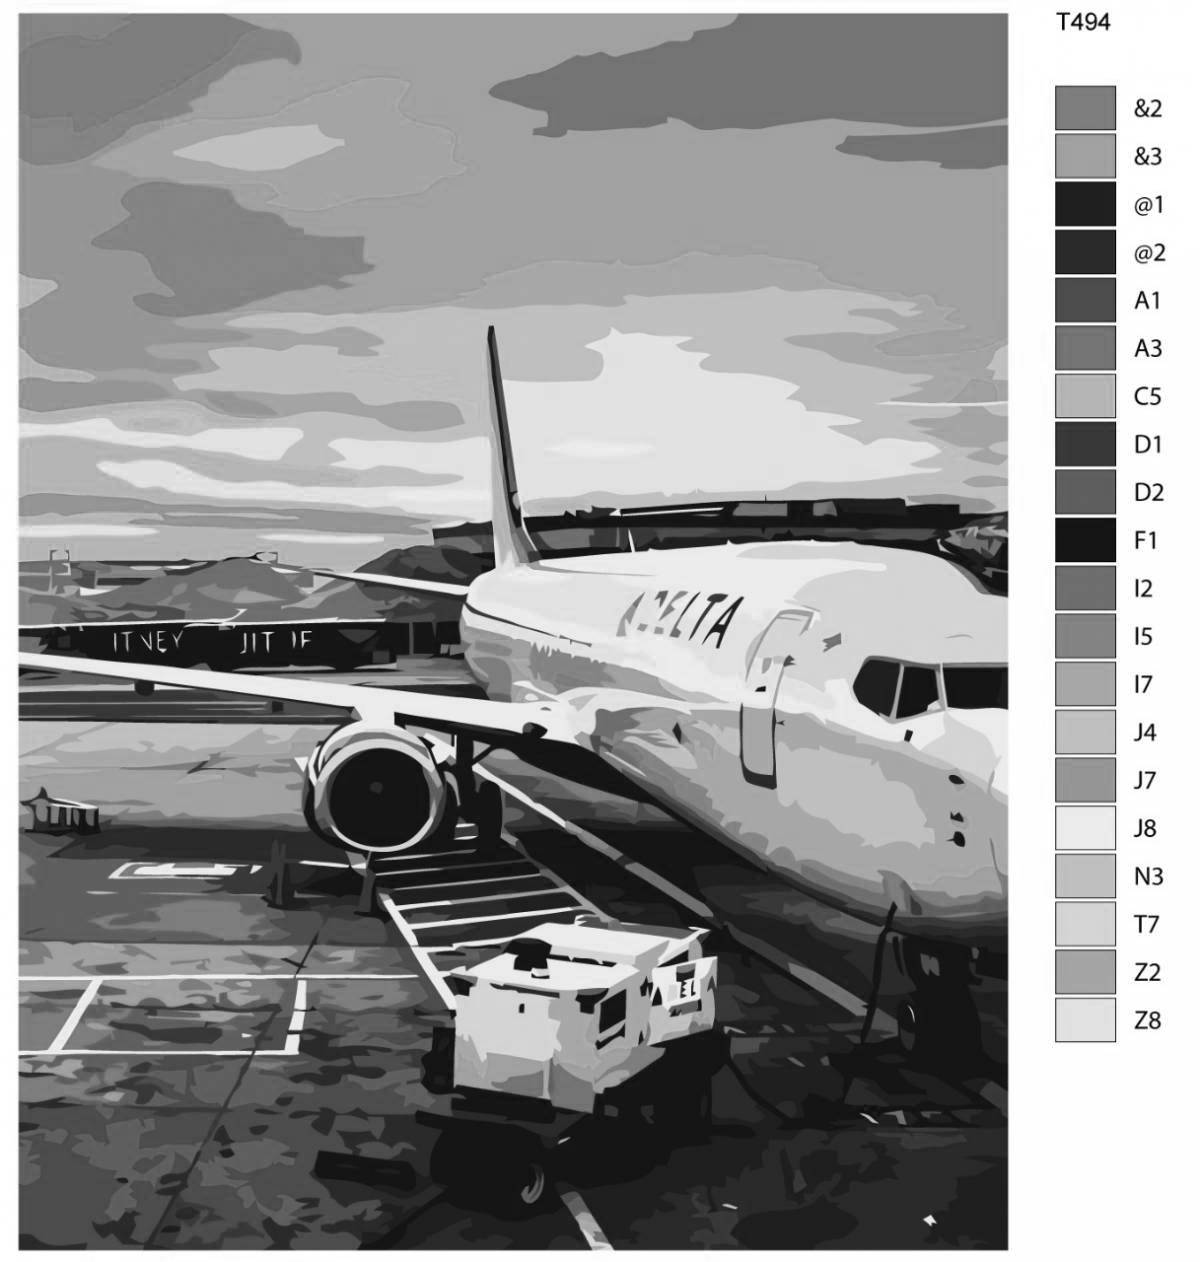 Tempting aircraft numbers coloring page